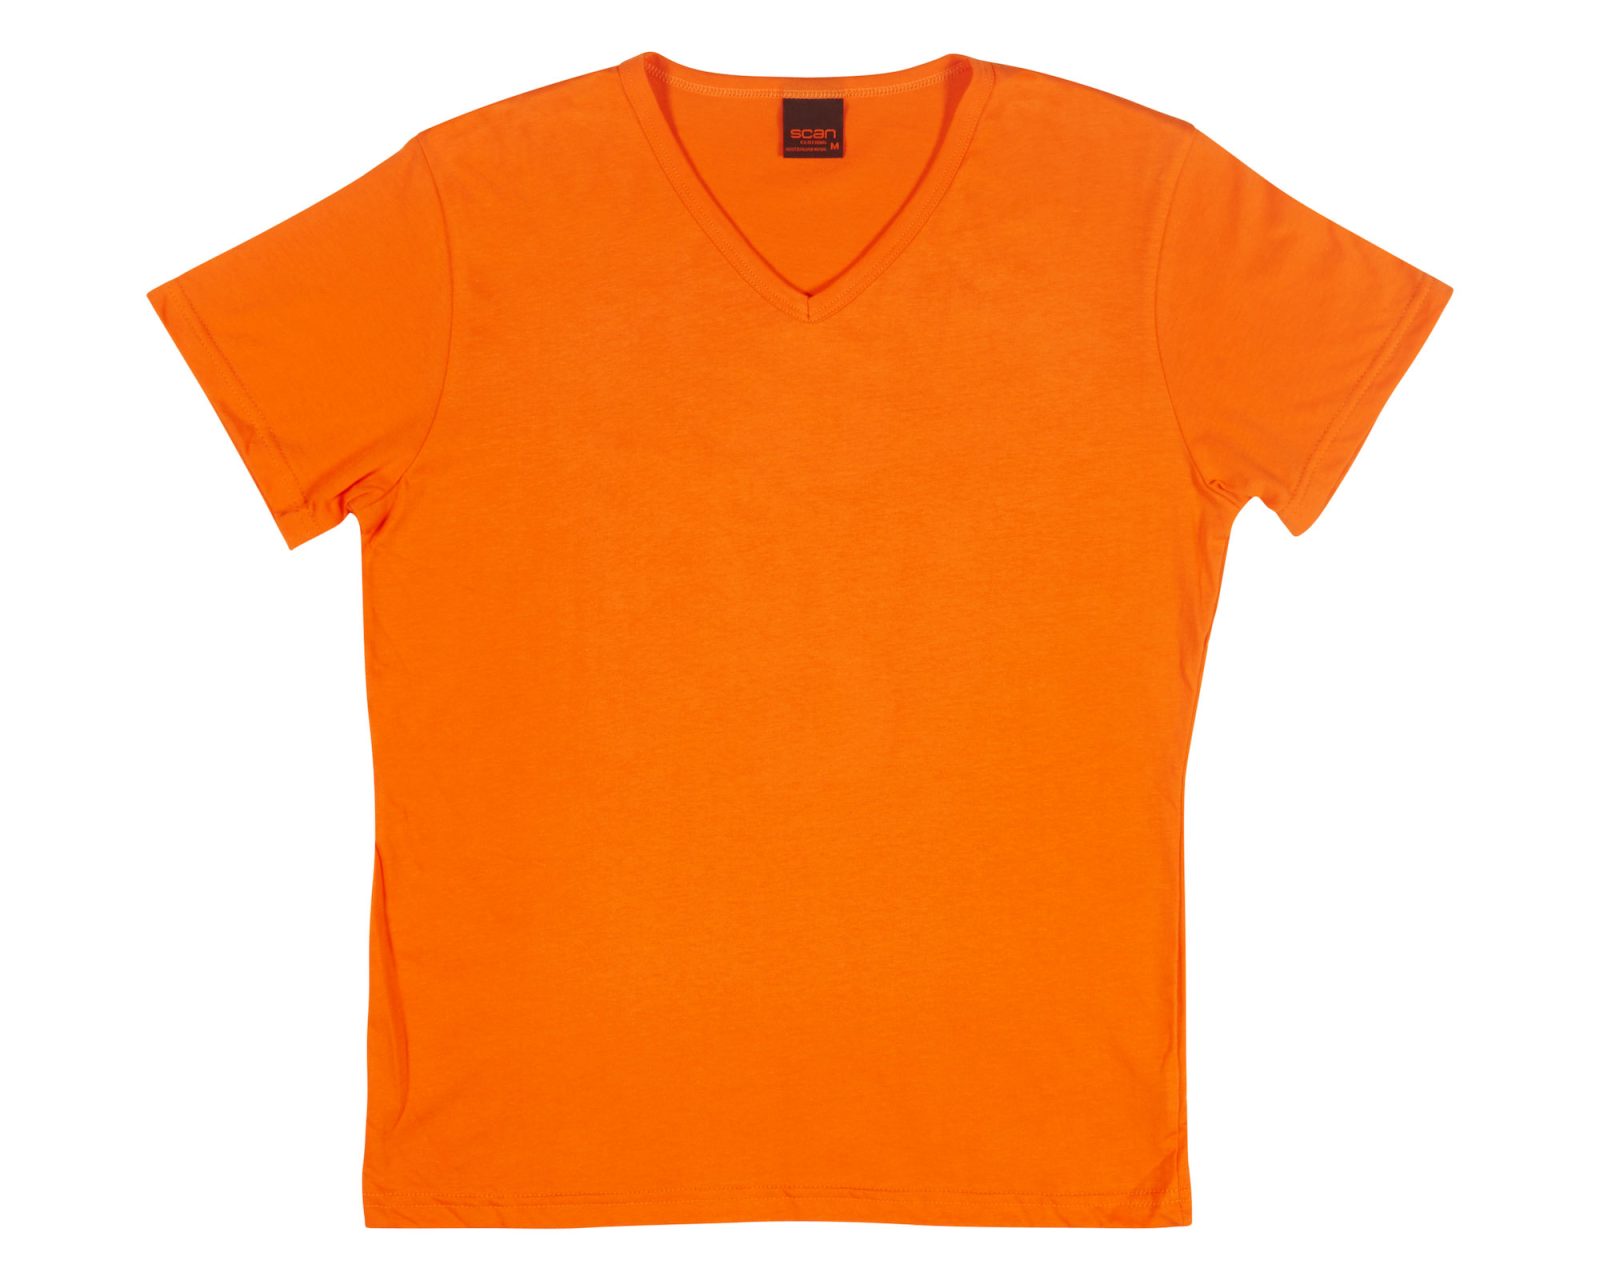 Qualitops-Fitted-VNeck-Short-Sleeve-Tee-Australian-Made